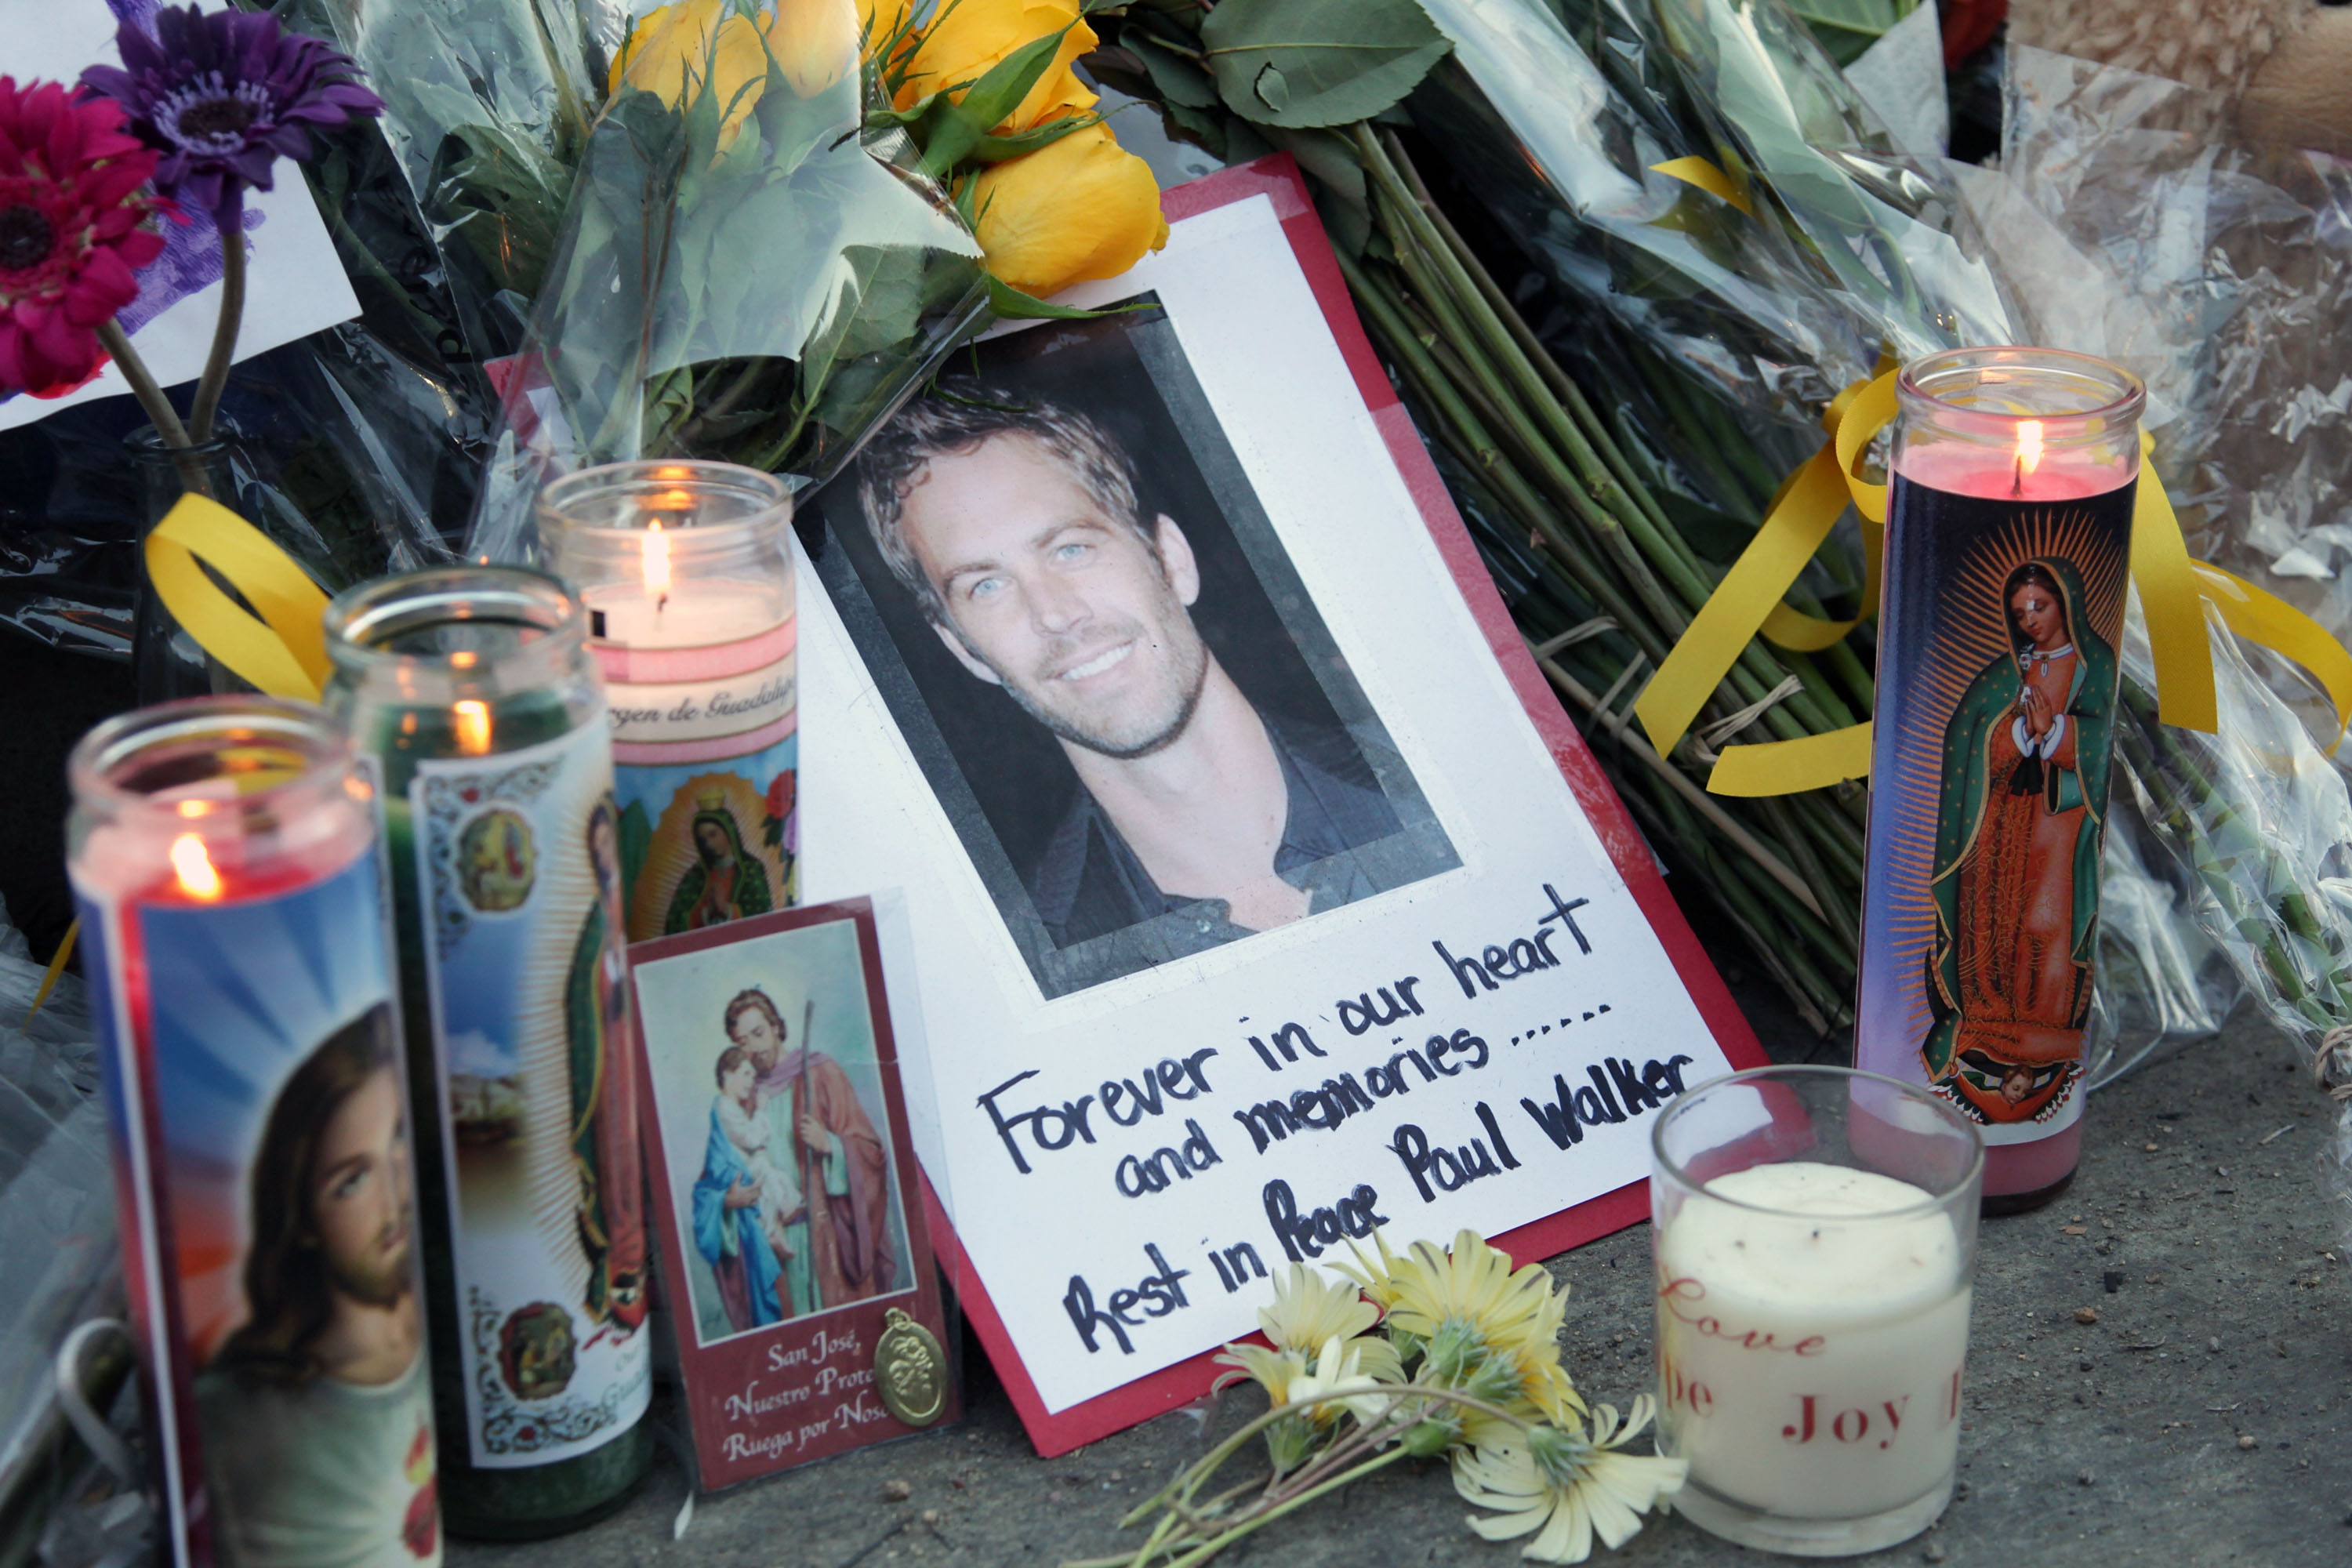 A general view of Paul Walker's memorial site on December 1, 2013, in Valencia, California. | Source: Getty Images